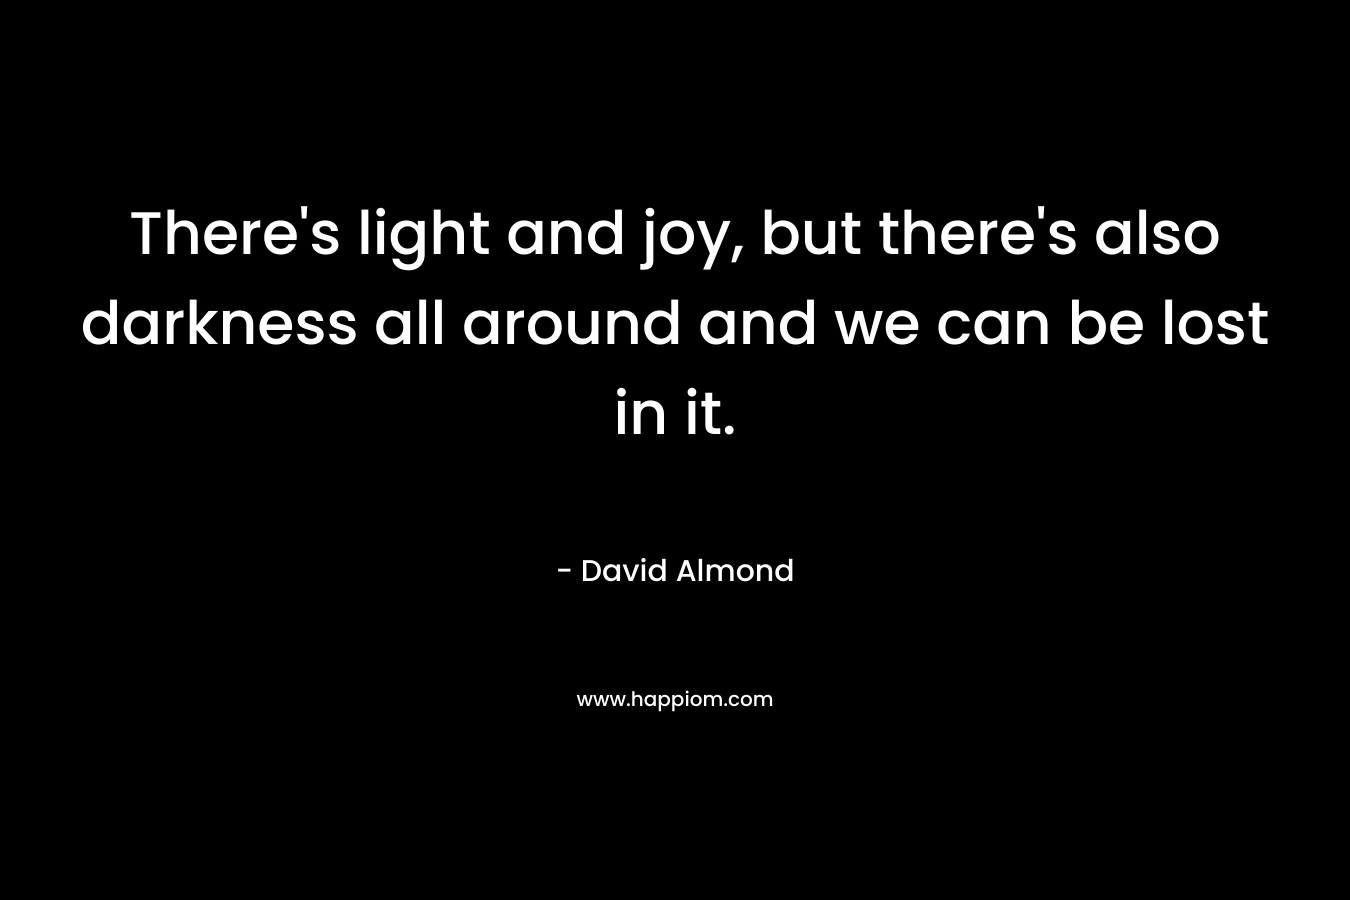 There’s light and joy, but there’s also darkness all around and we can be lost in it. – David Almond